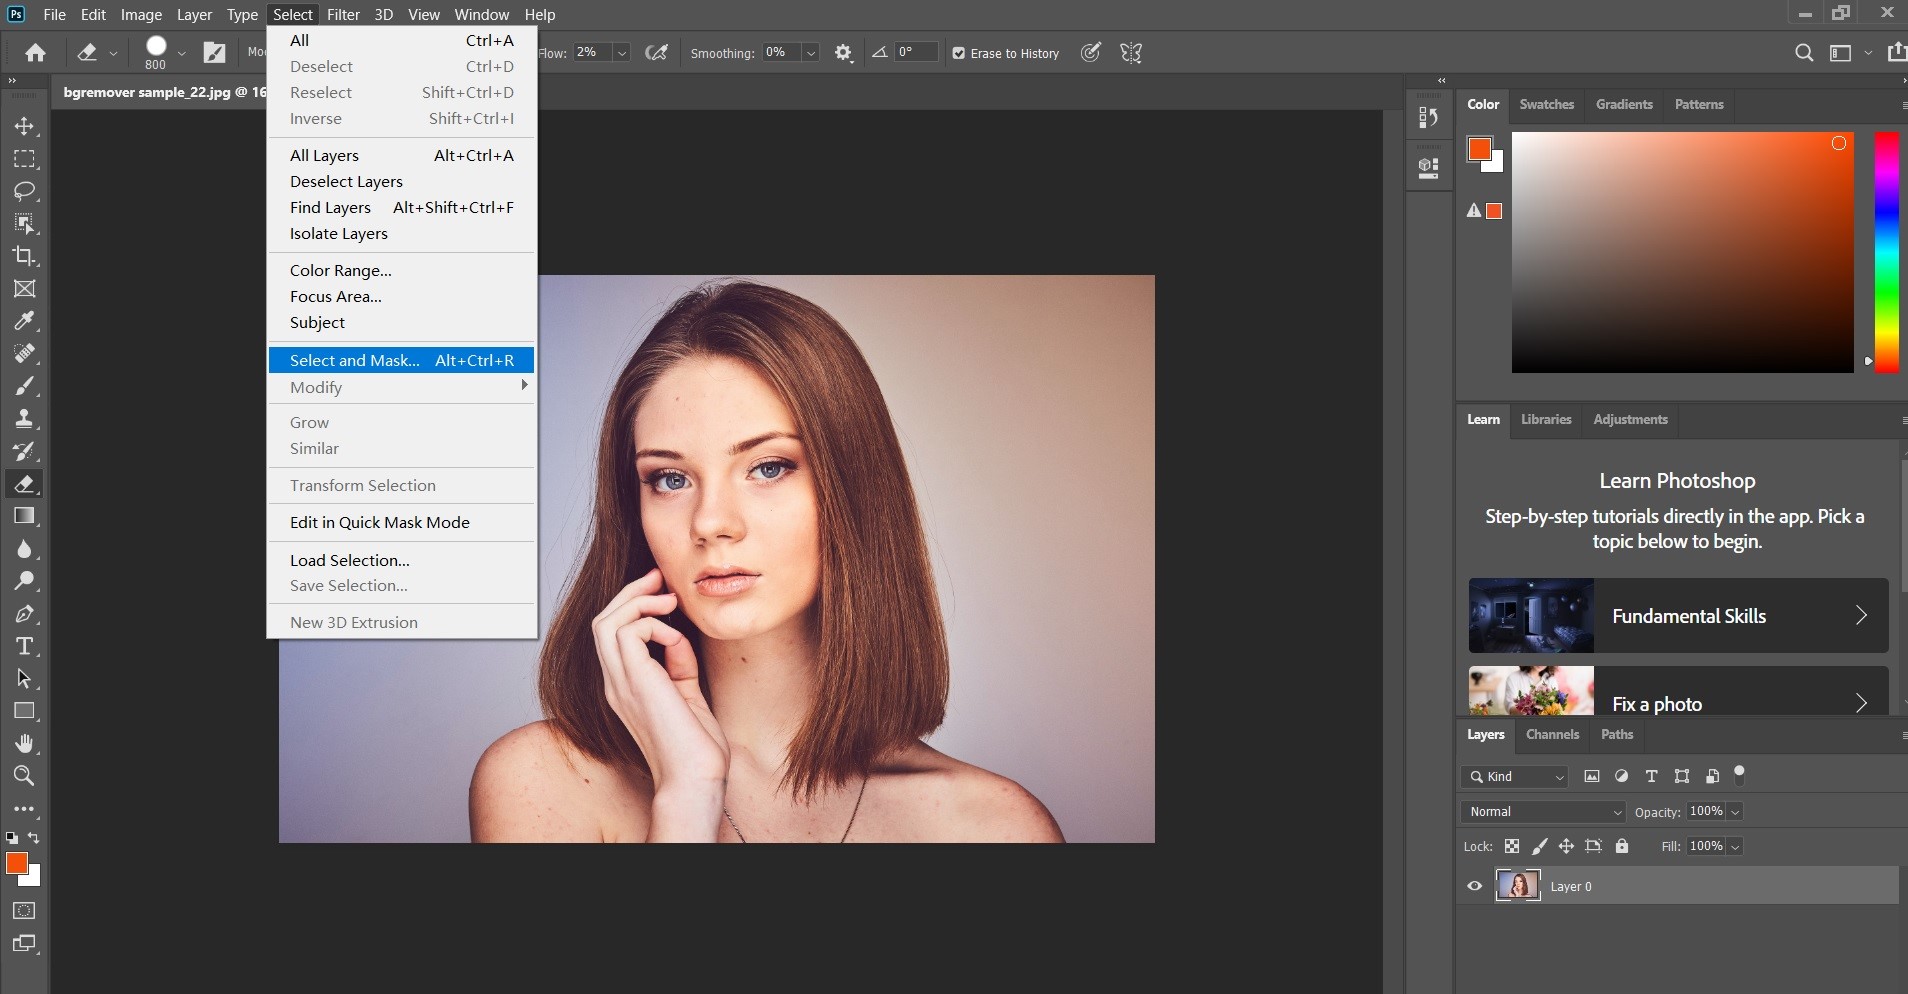 How to Extract Image From Background in Photoshop - BGremover